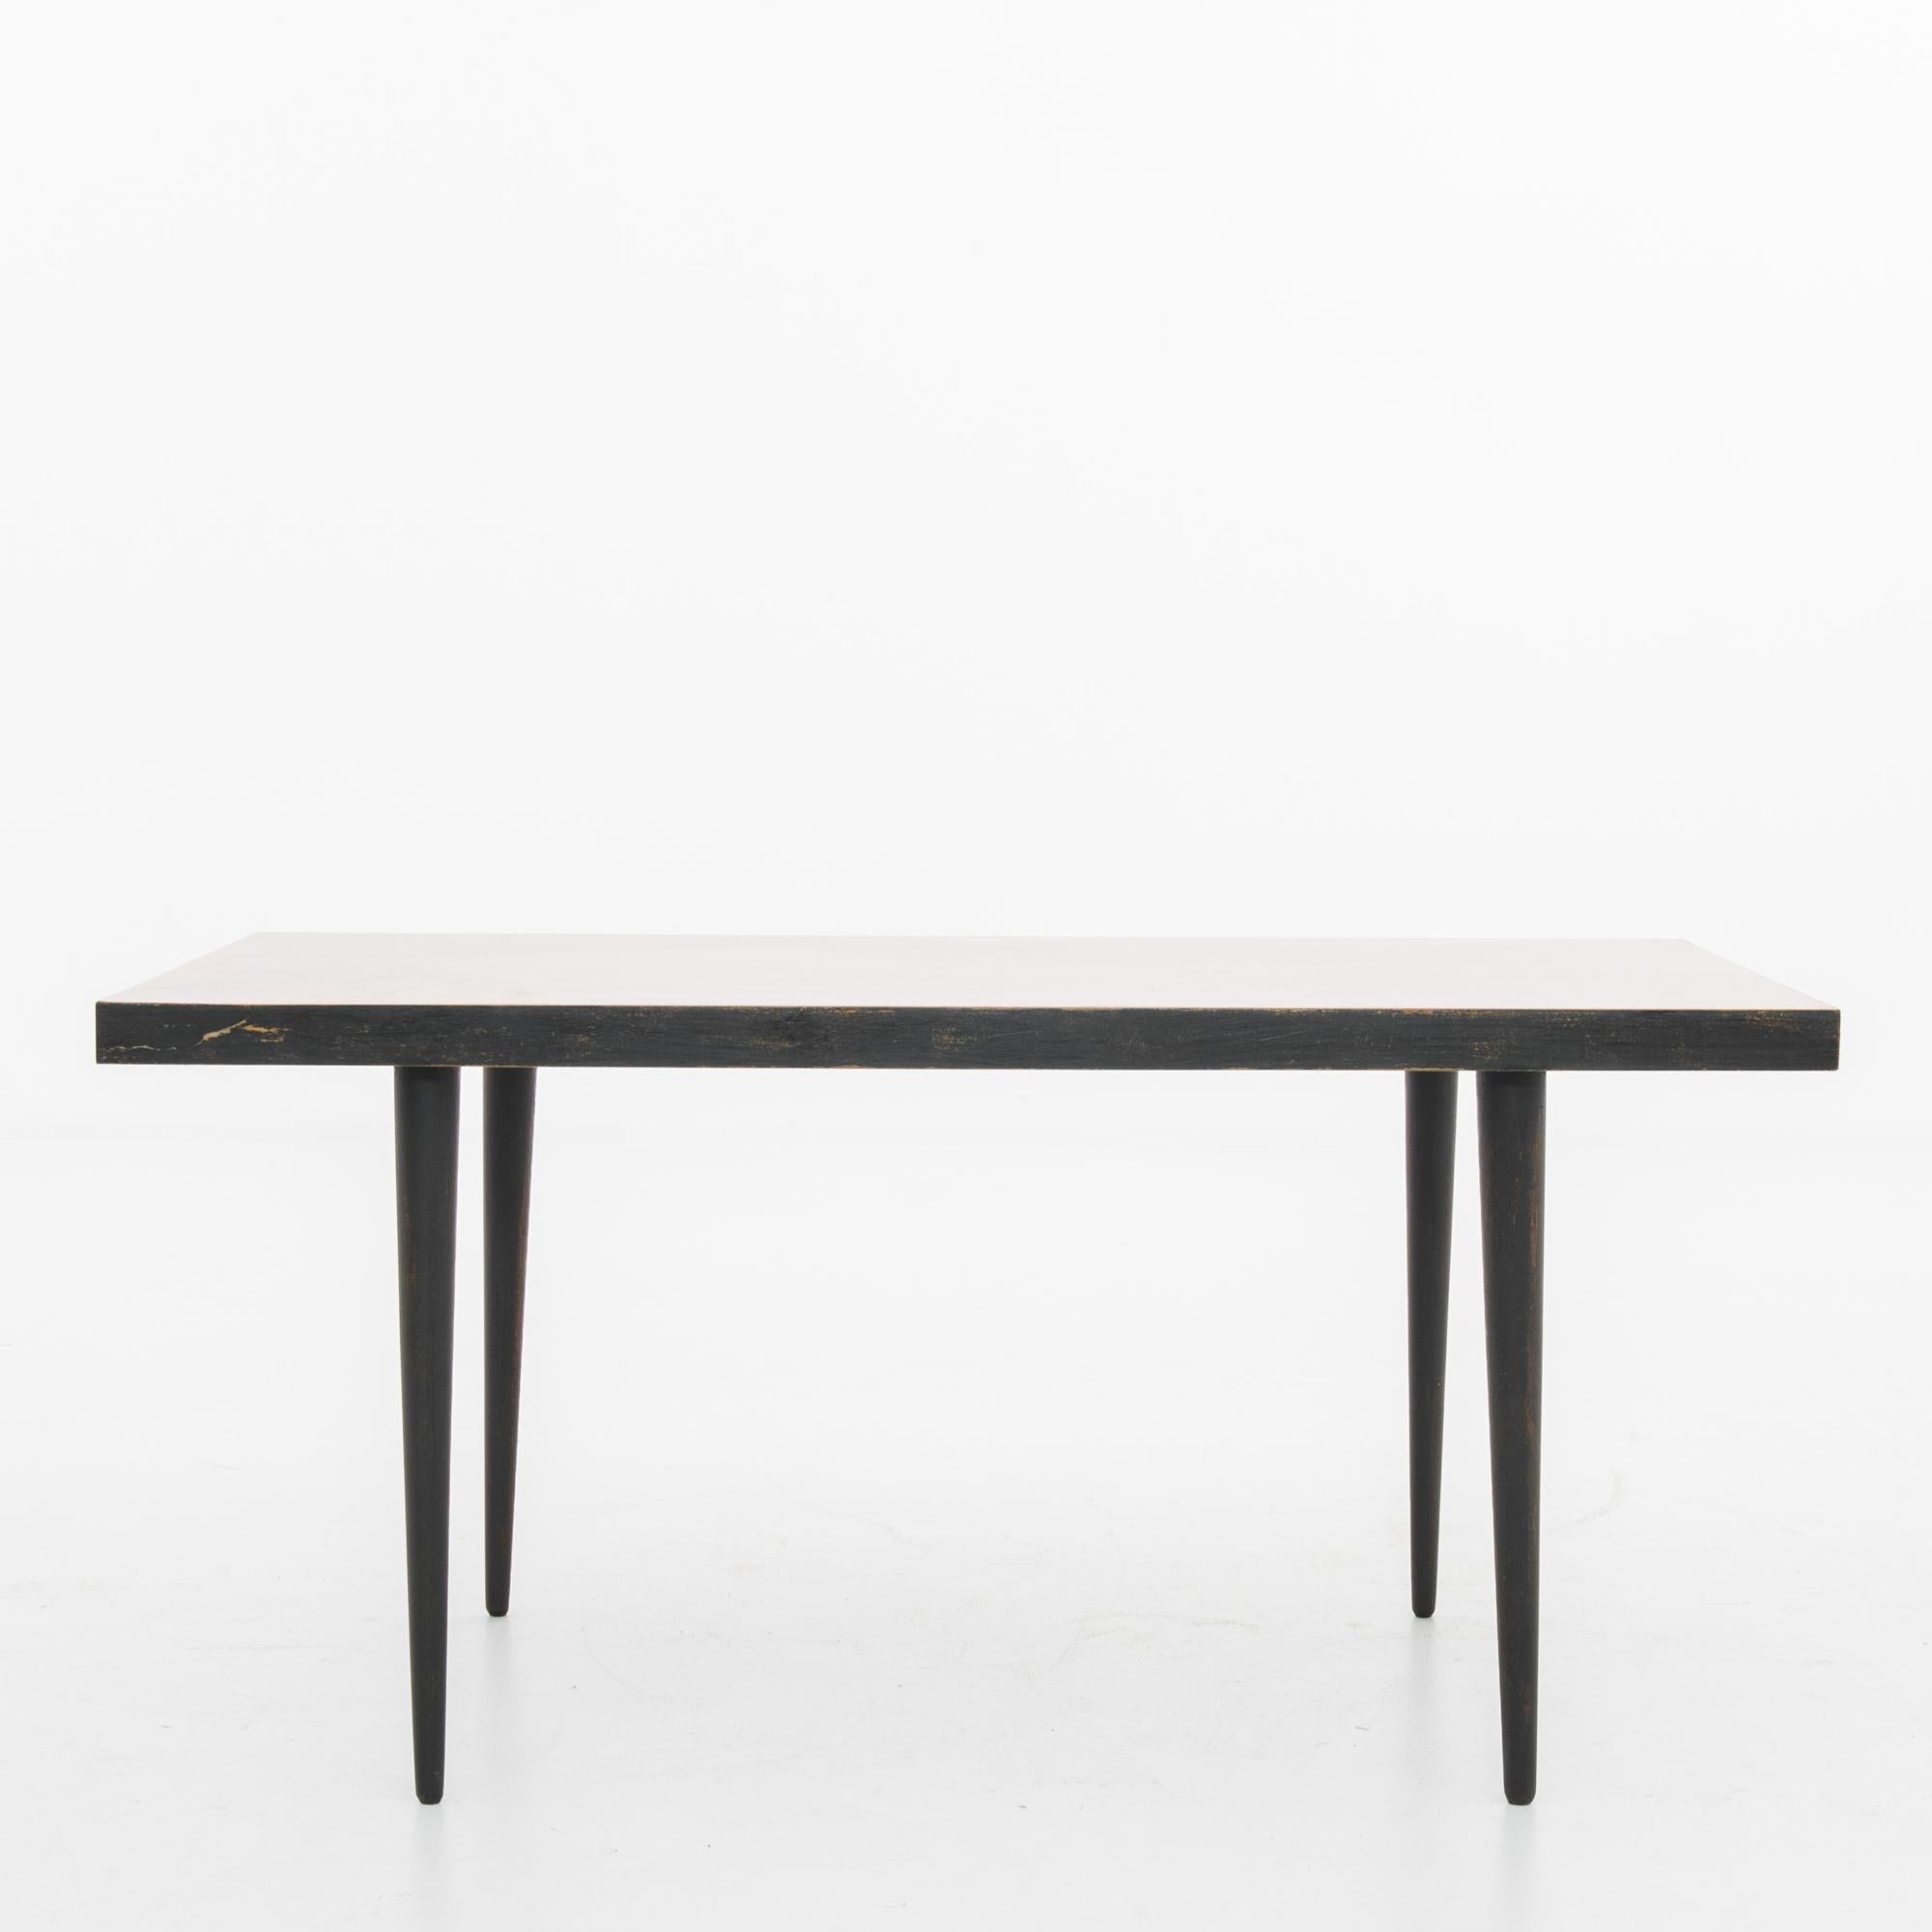 A wooden coffee table from 1950s Czechia. A stylish Mid-Century Modern design: the rectangular table top sits atop four tapered legs for a clean, Minimalist Silhouette. The legs and profile of the table top are painted black, creating a sleek